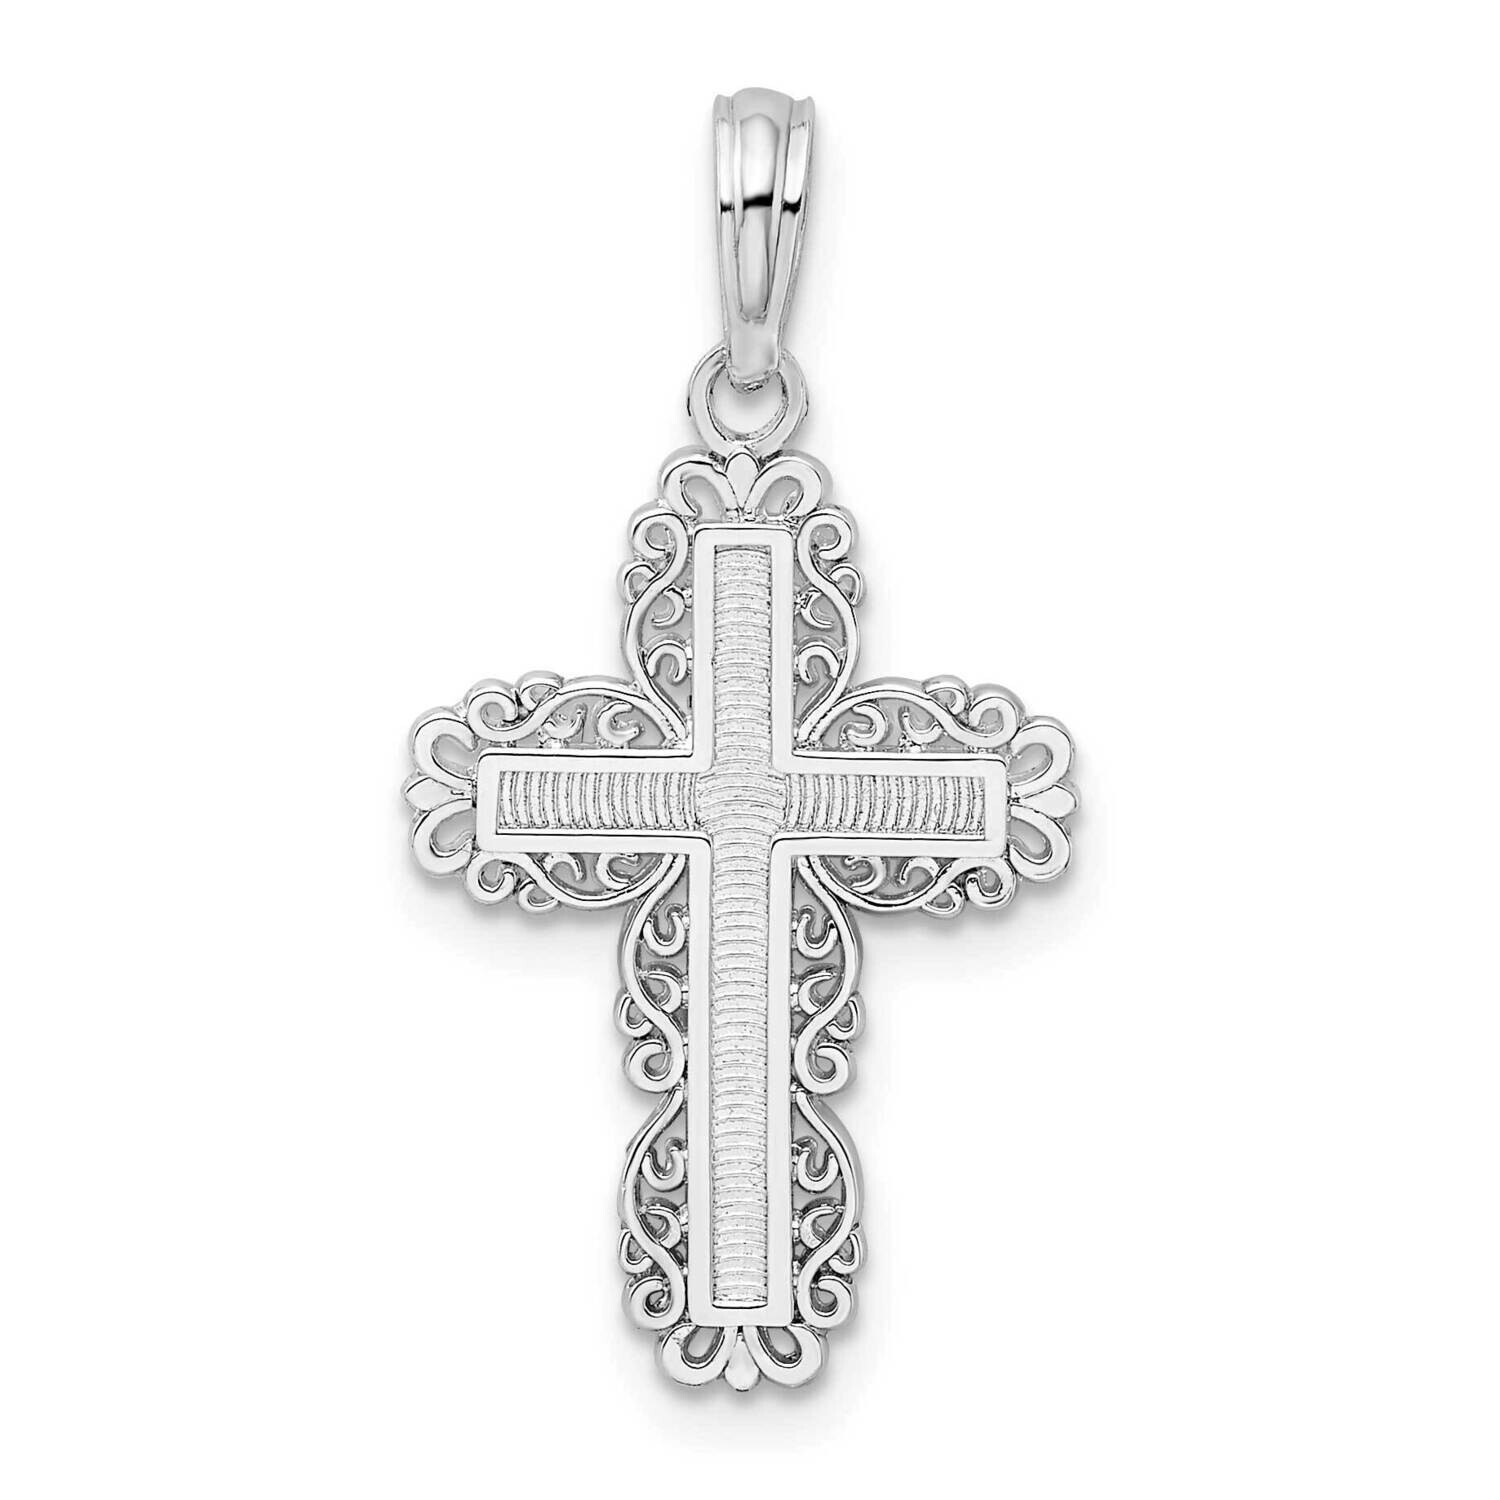 Lace Border Latin Cross Pendant Sterling Silver Polished QC10479